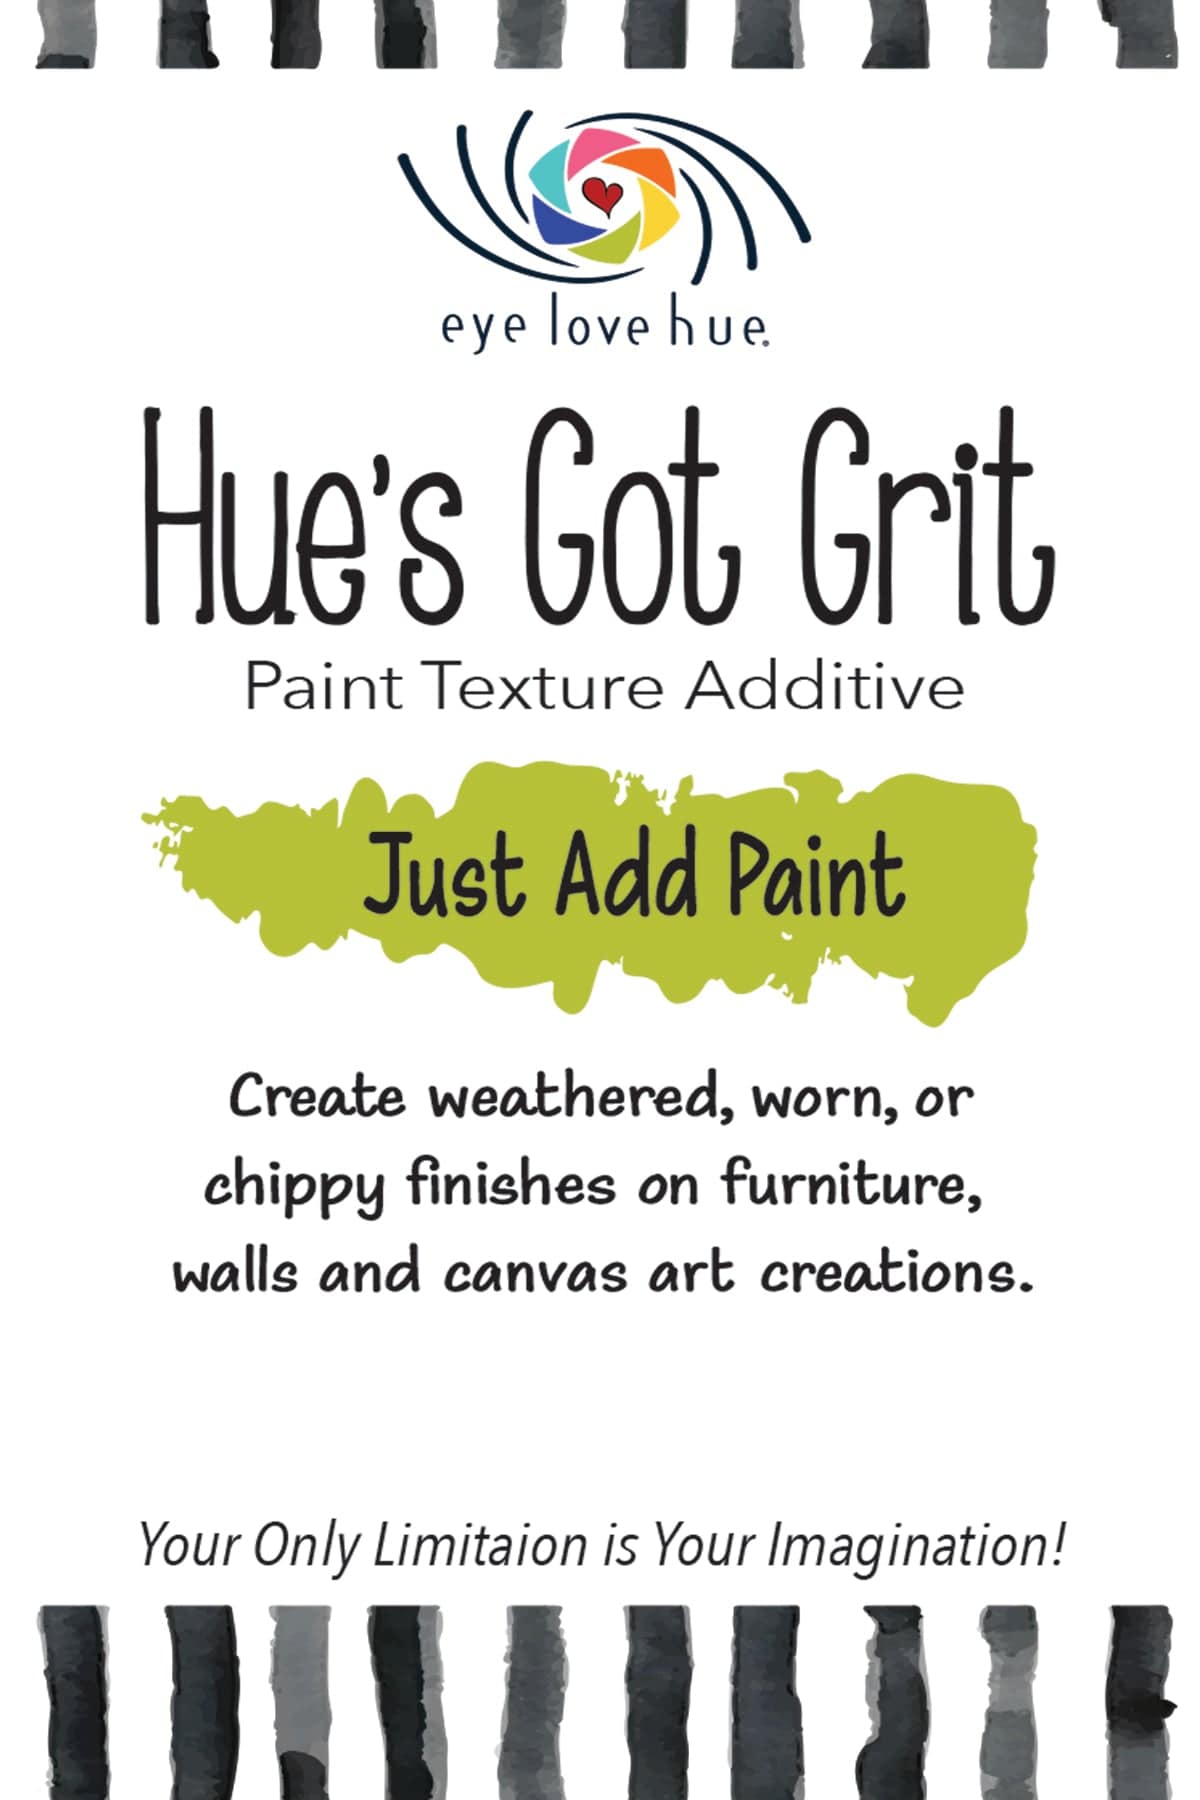 Eye Love Hue Paint & Products Hue's Got Grit Texture Additive Acrylic Mineral Paint Chalk Paint Clay Paint